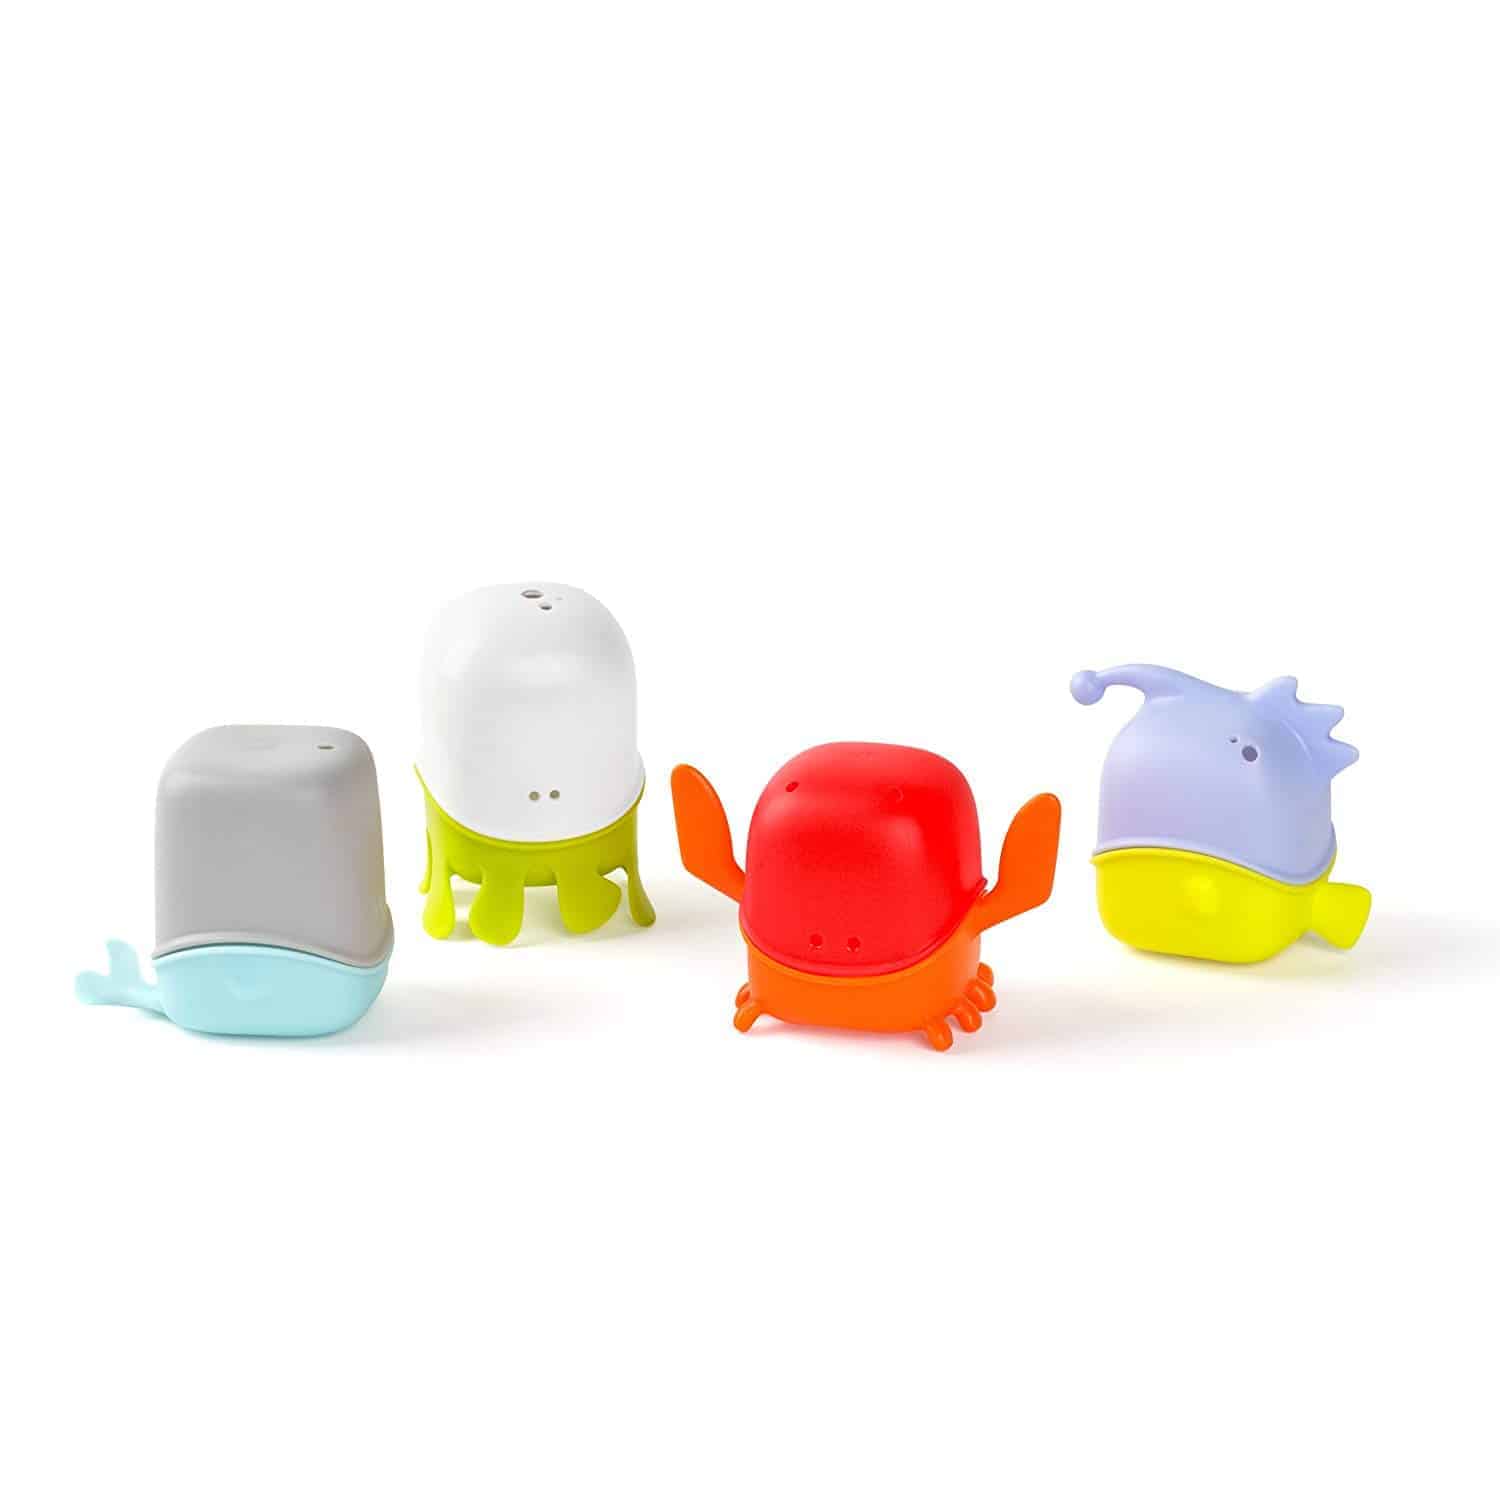 the-best-bathtub-toys-for-toddlers